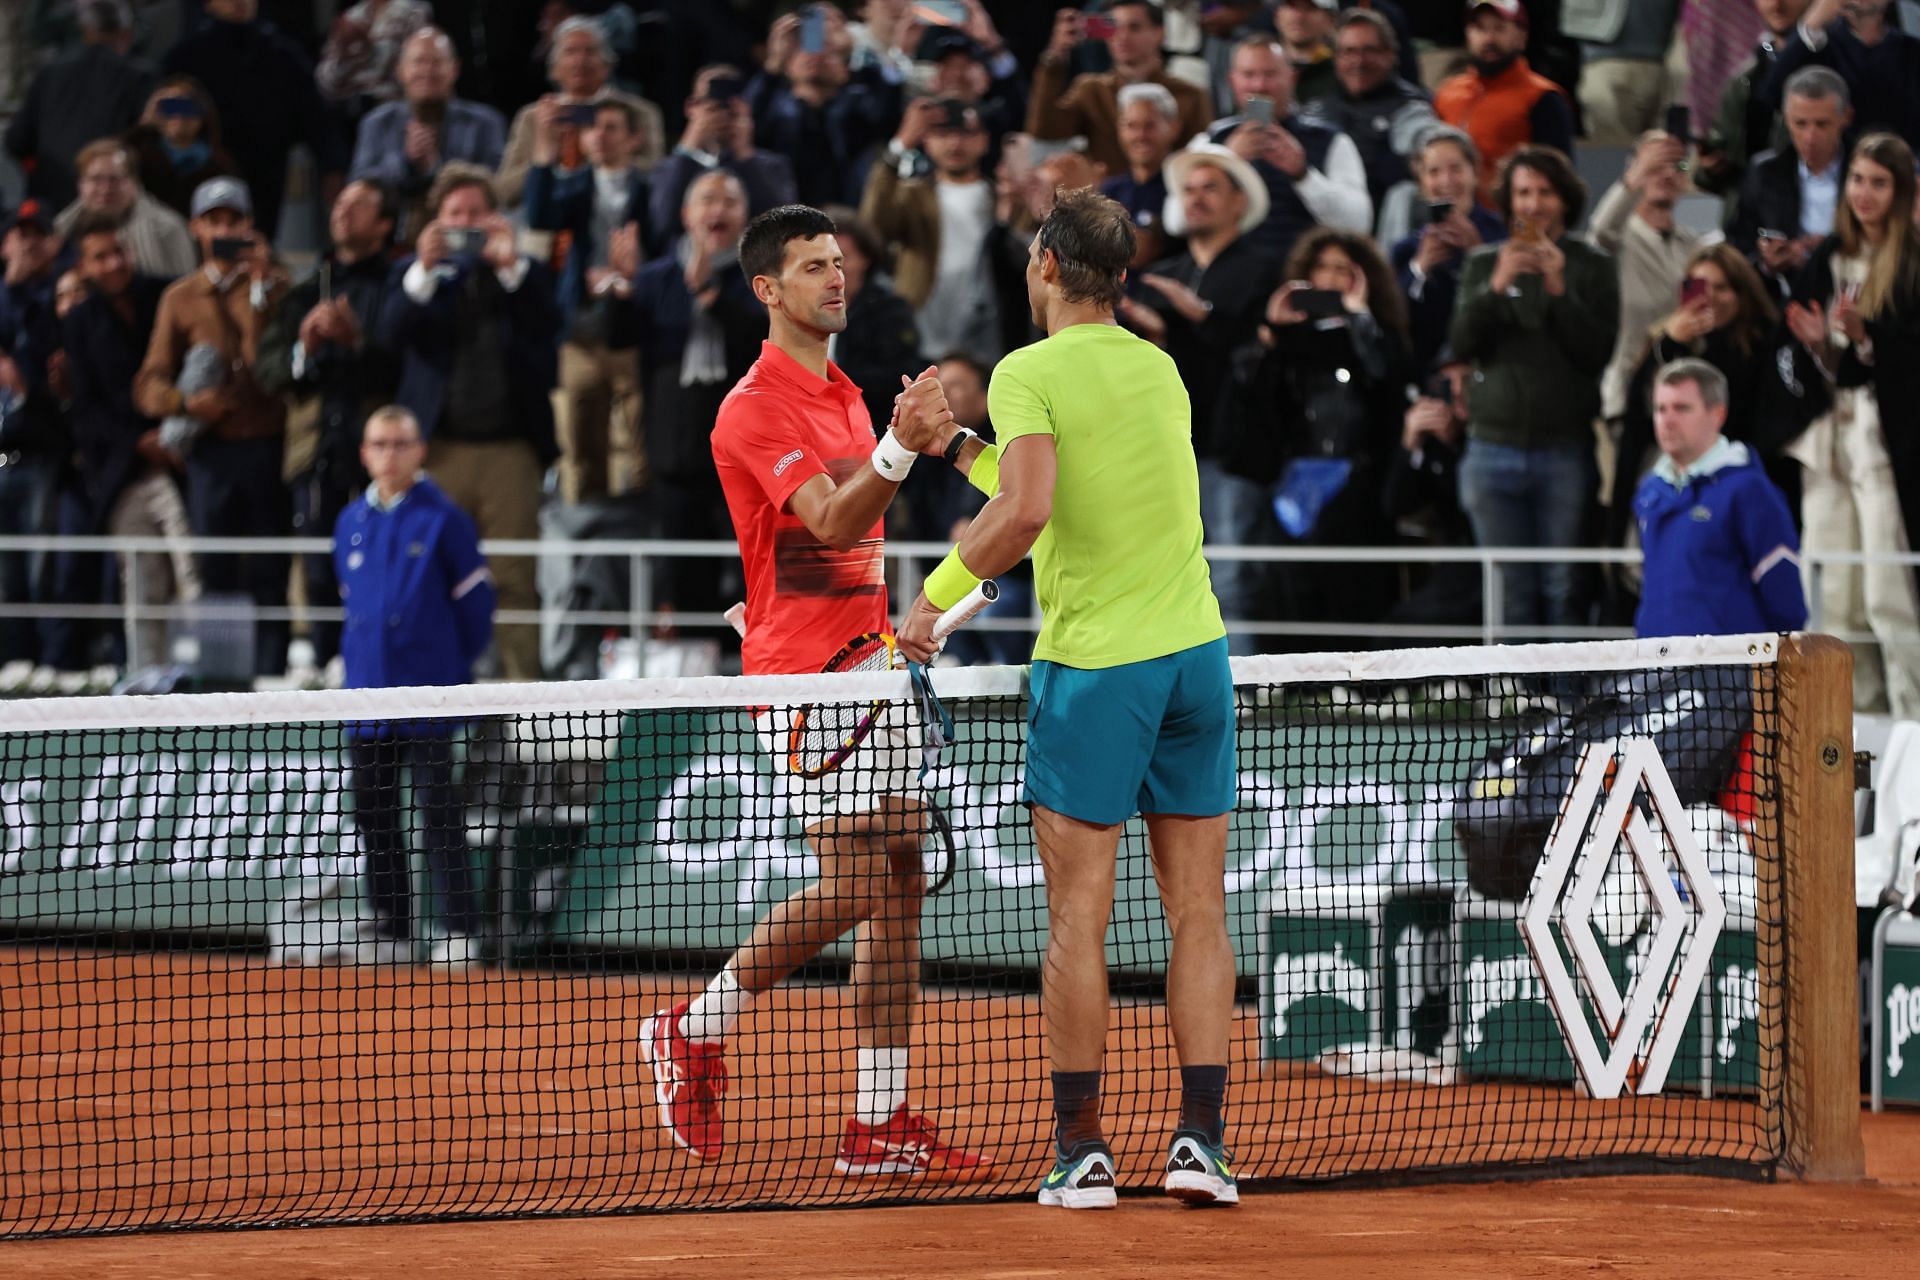 The French Open quarterfinals proved to be yet another classic between two greats of the game